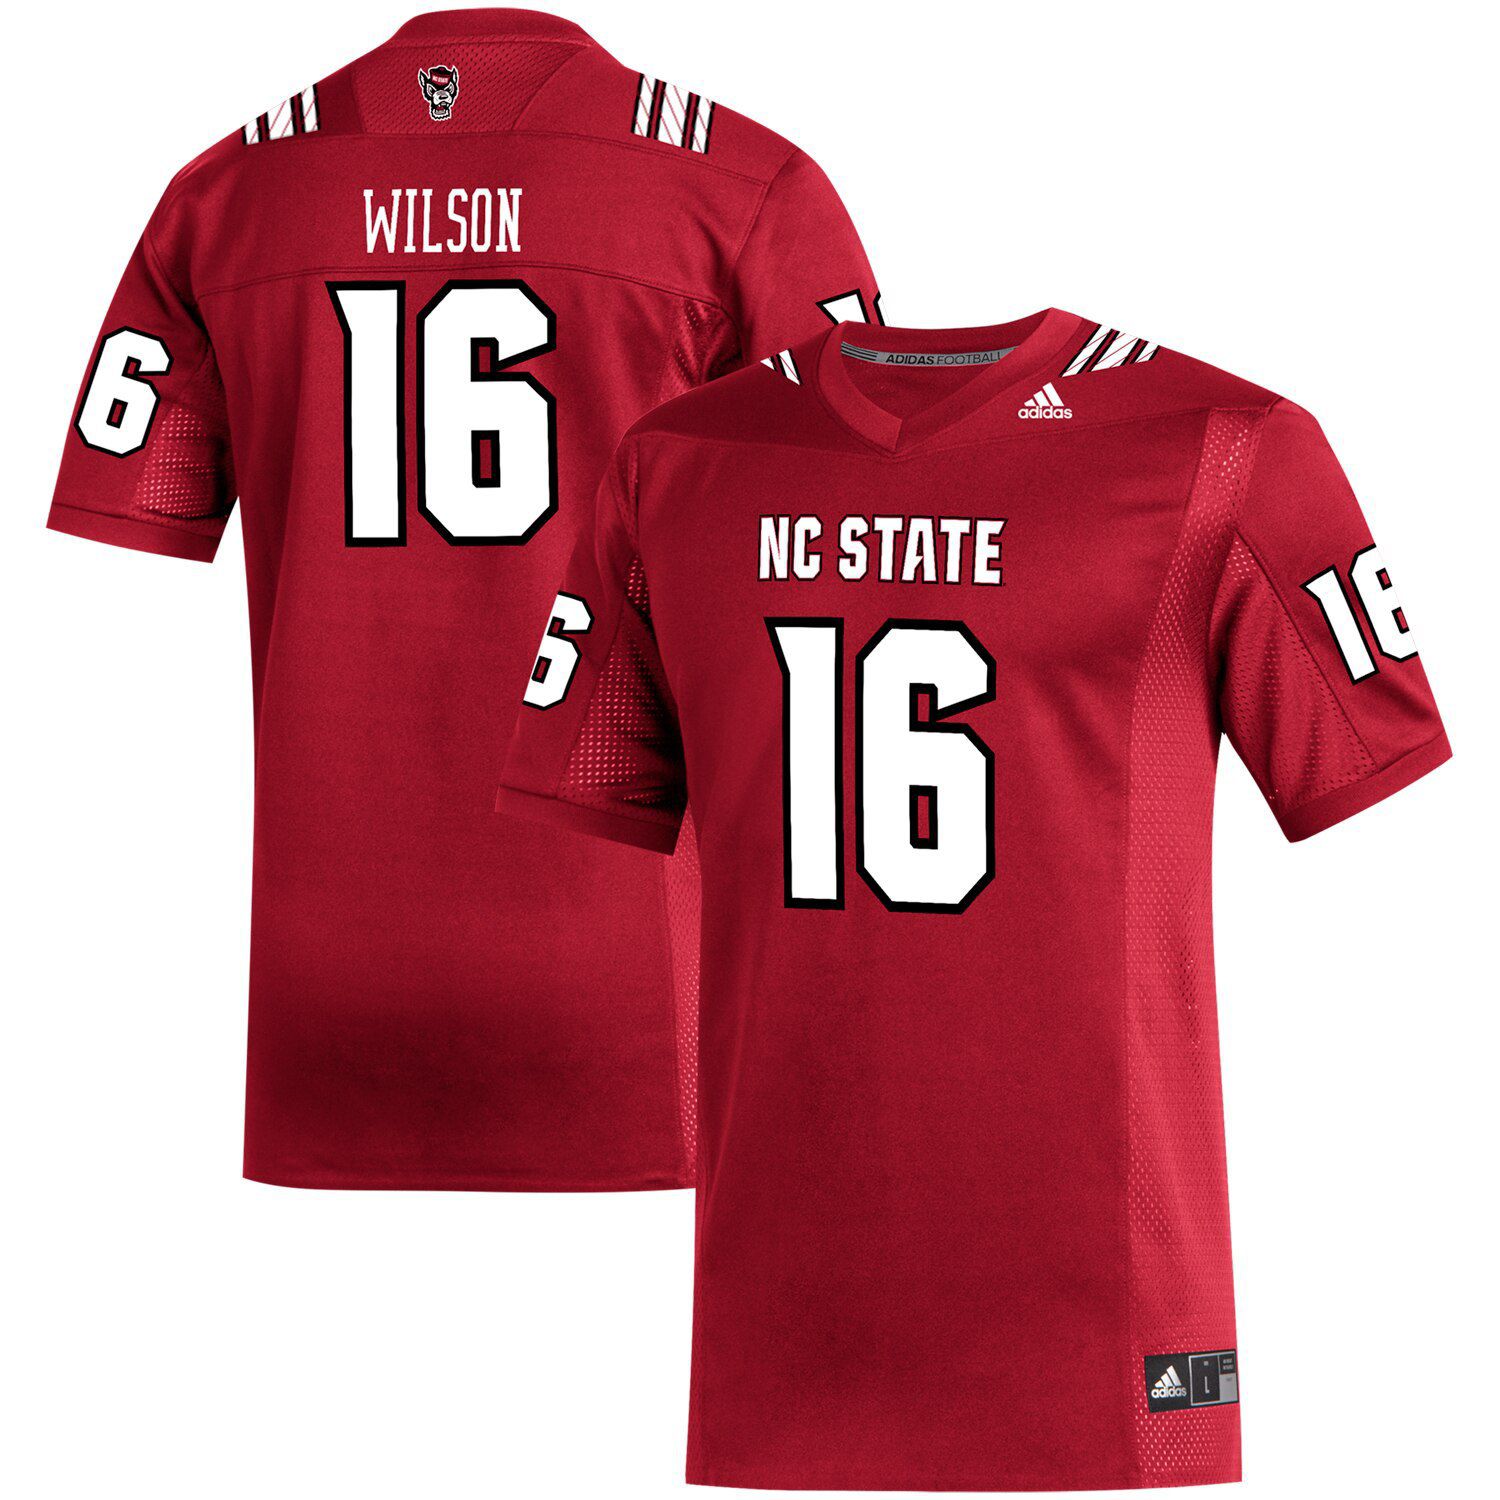 nc state russell wilson jersey